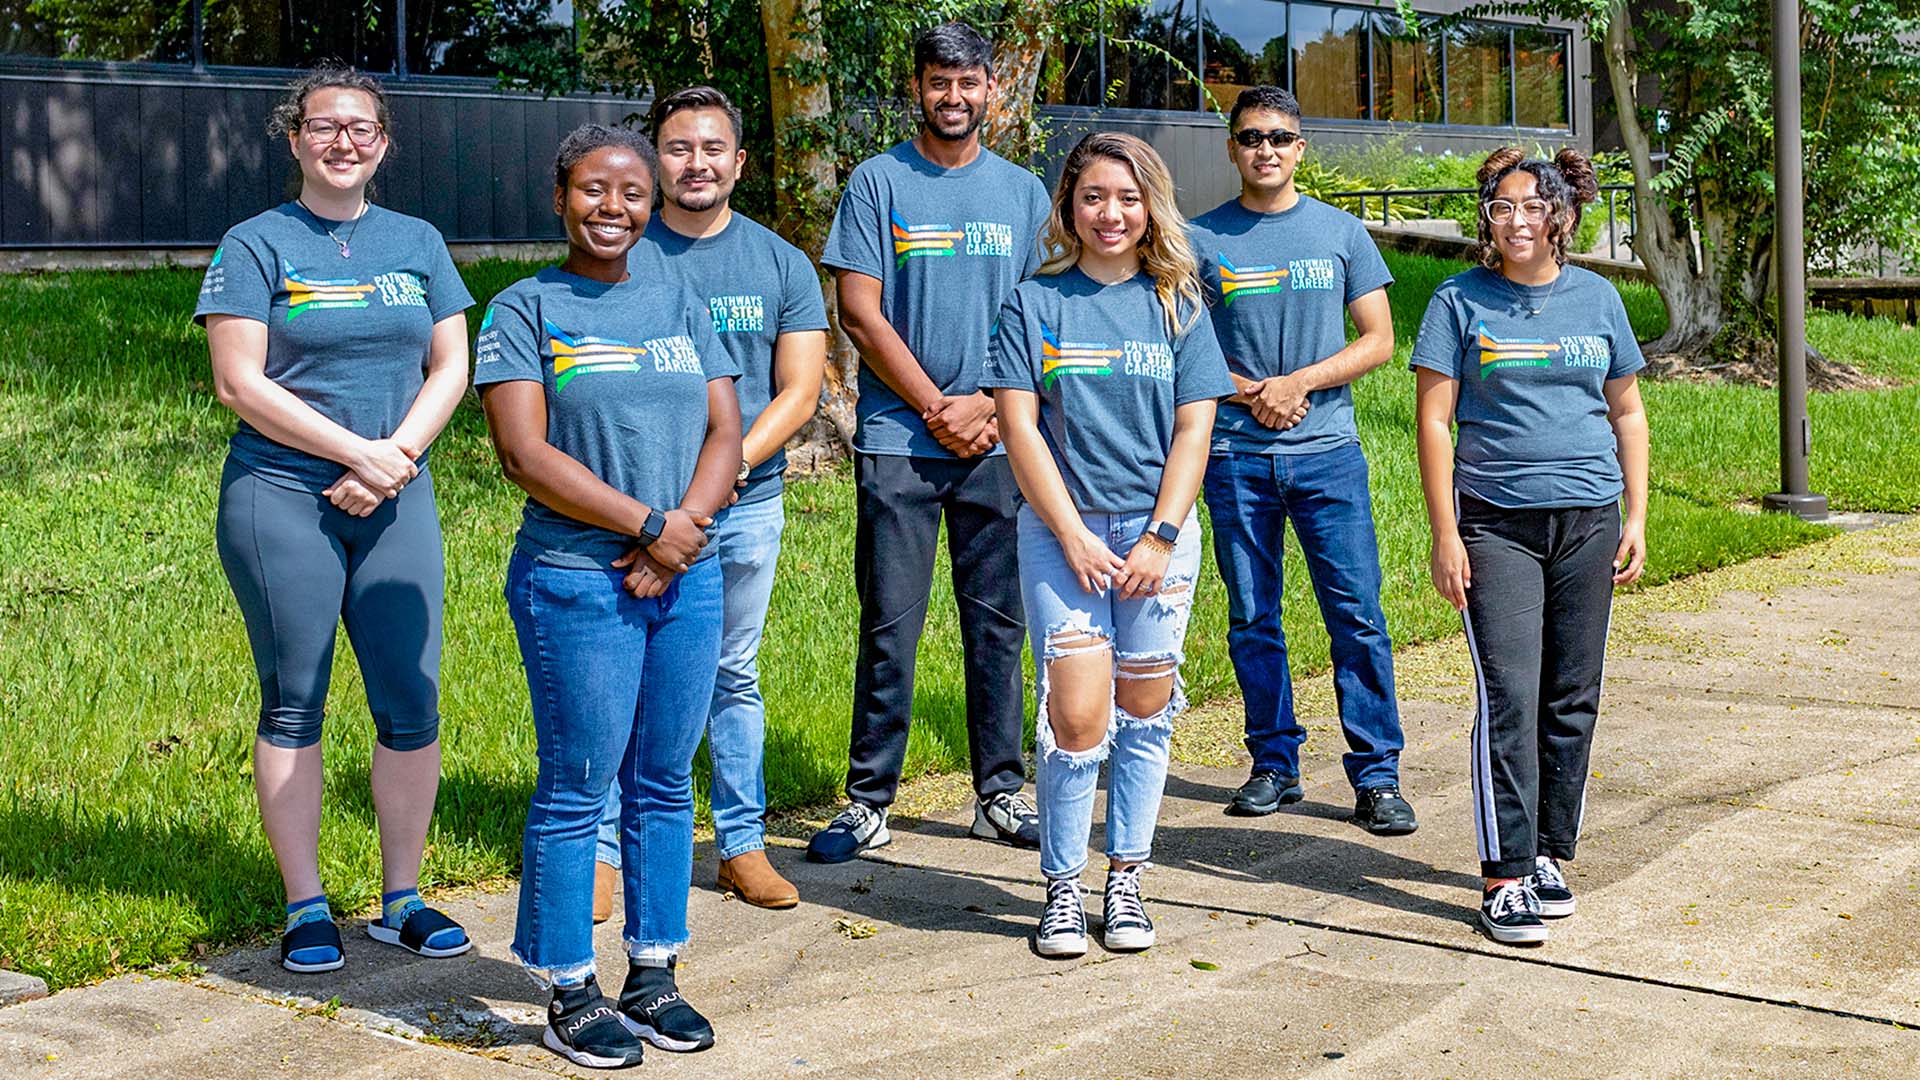 Students gathered on the UHCL campus wearing Pathways to Stem Careers shirts